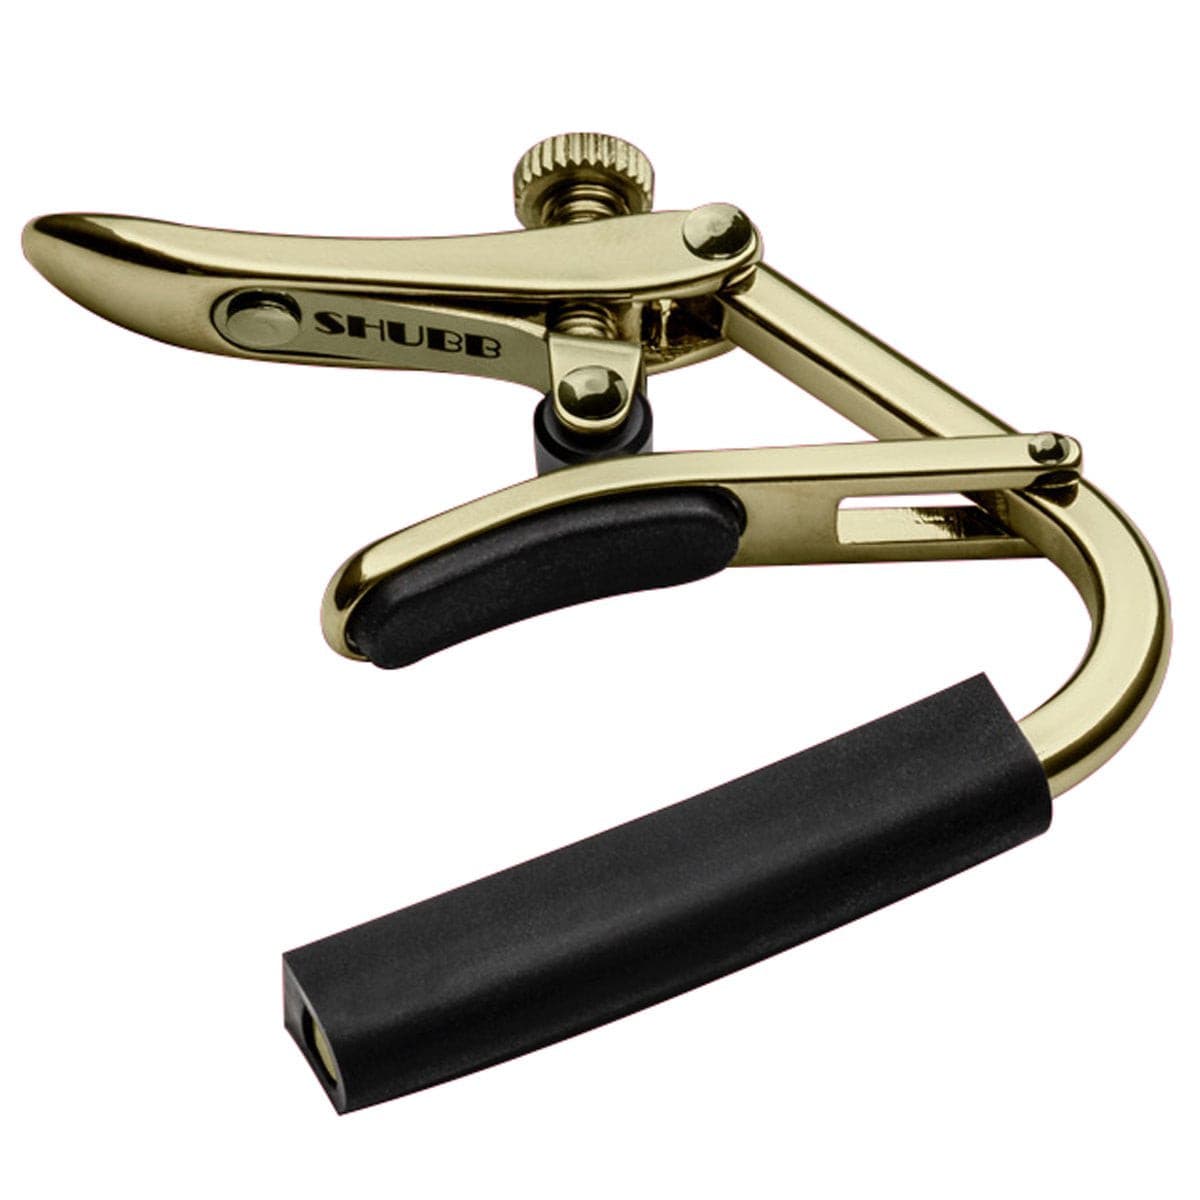 Shubb 'Capo Royale' Electric Guitar Capo - Gold, Accessory for sale at Richards Guitars.